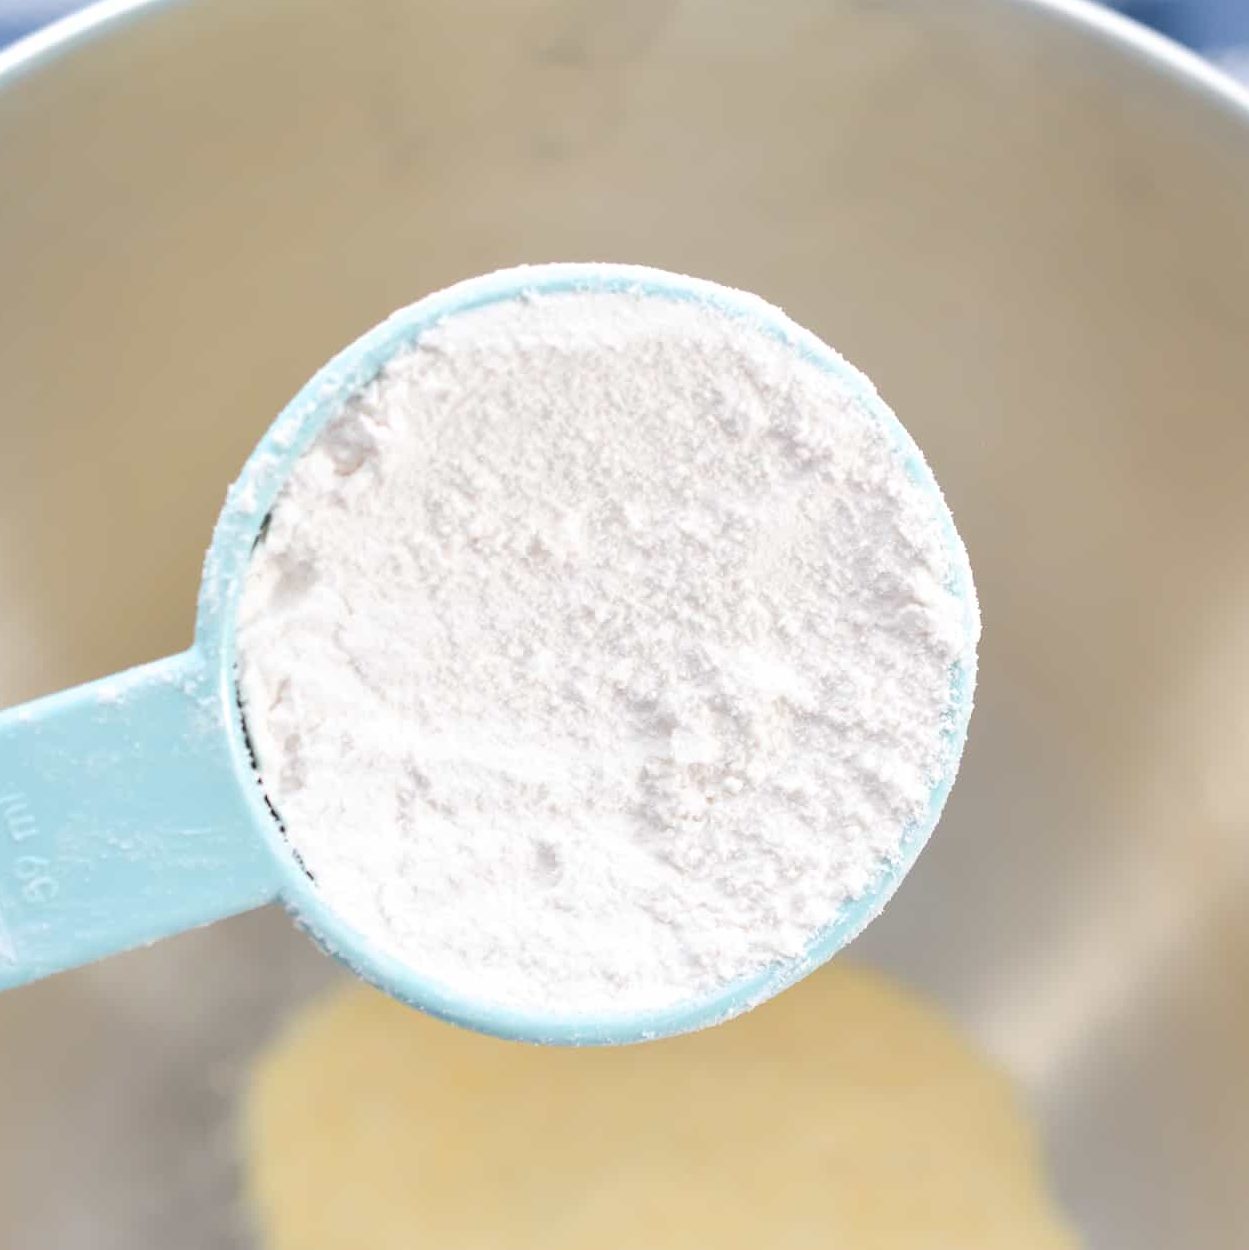 add ¼ cup of All-purpose flour.